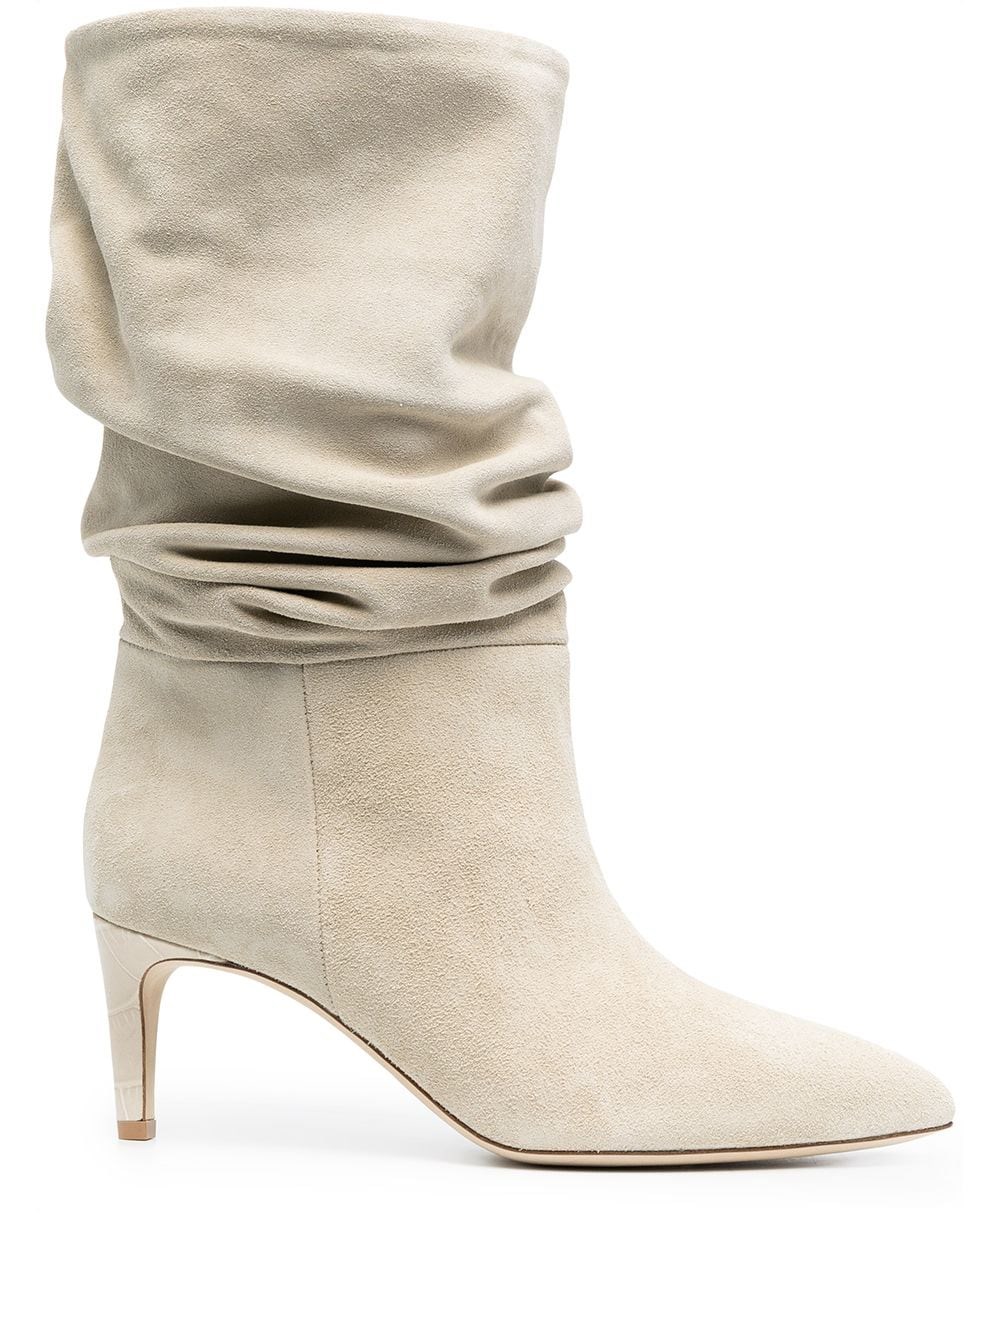 Paris Texas High Heels Ankle Boots In Beige Suede In White